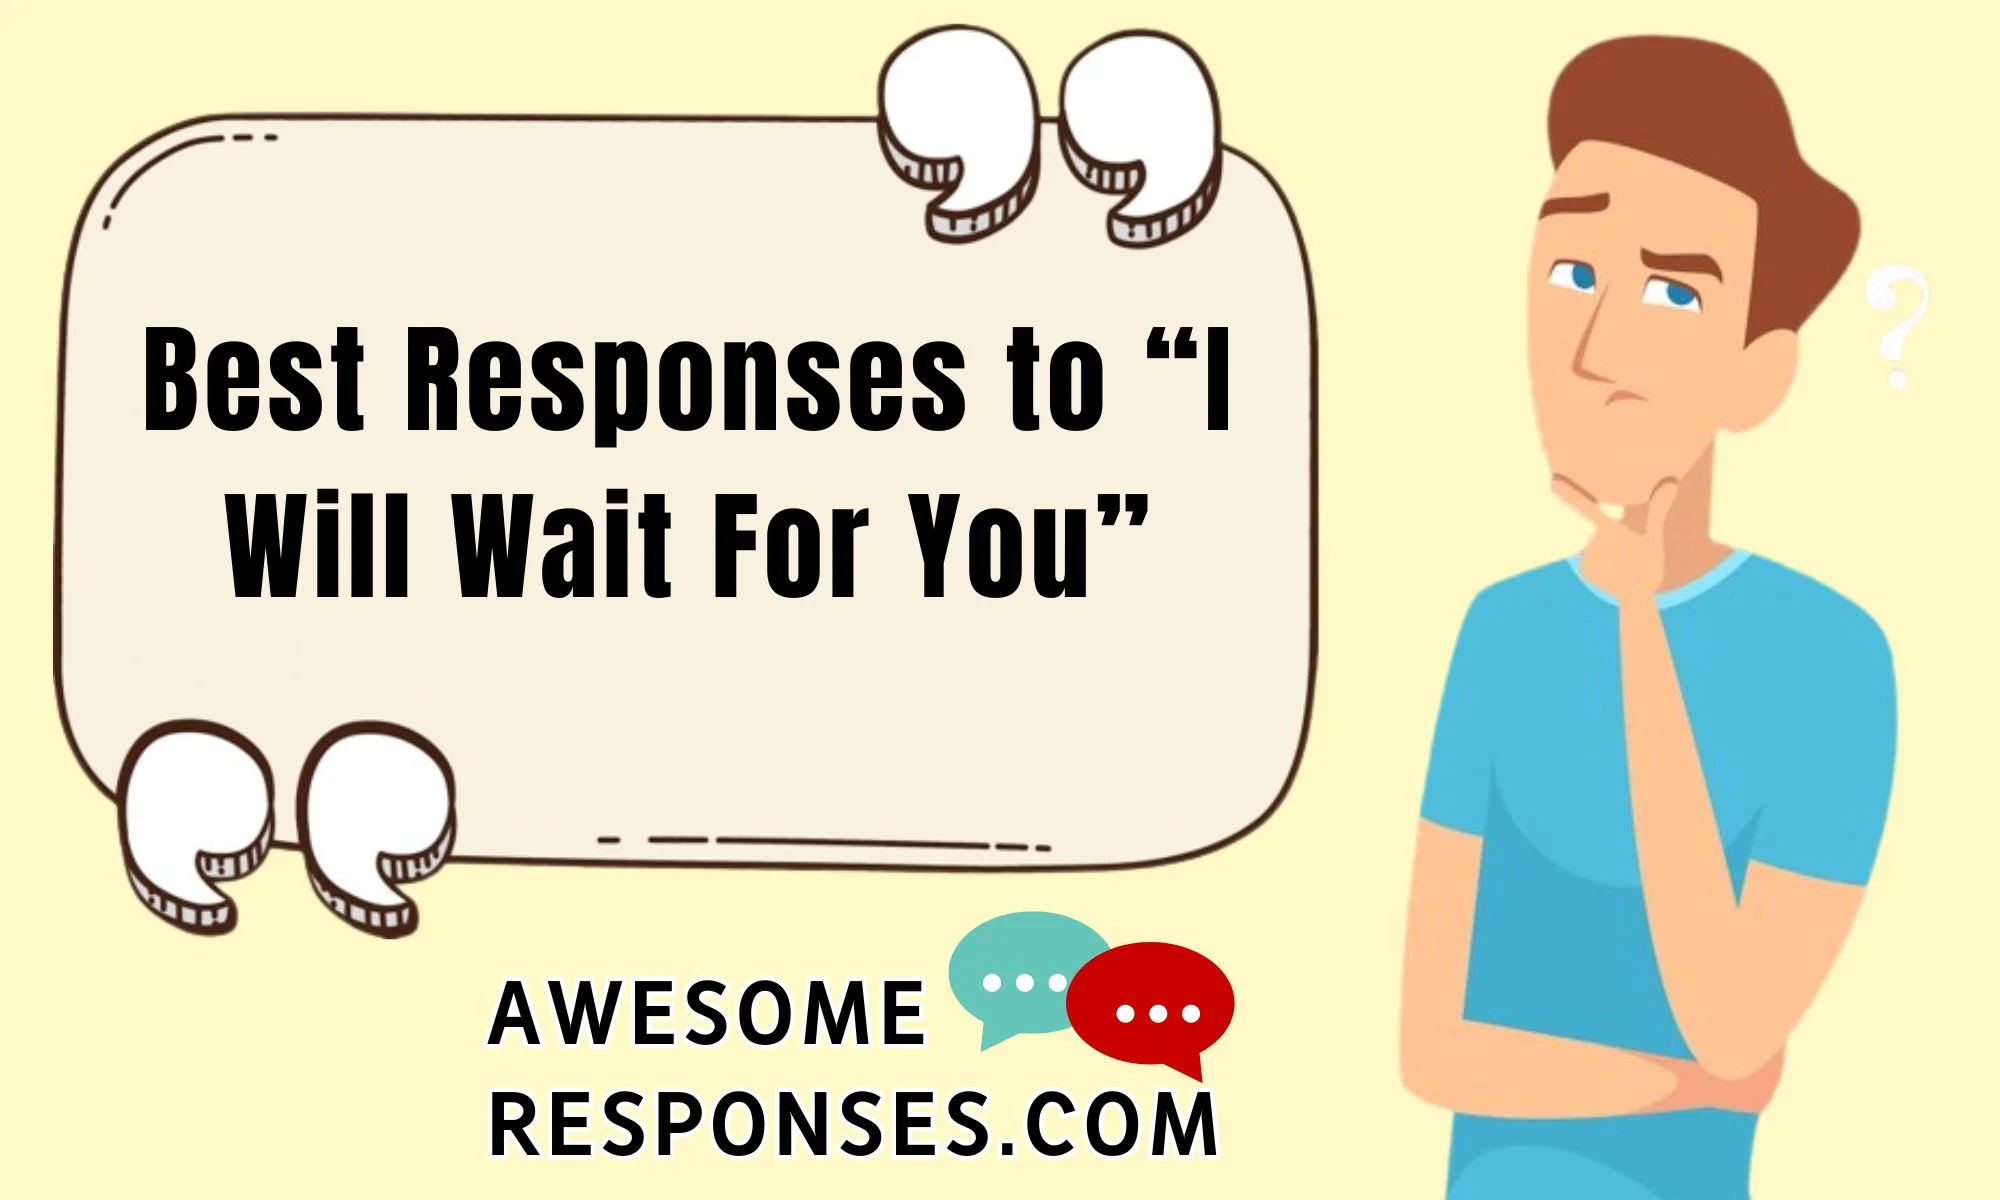 Best Responses to “I Will Wait For You”